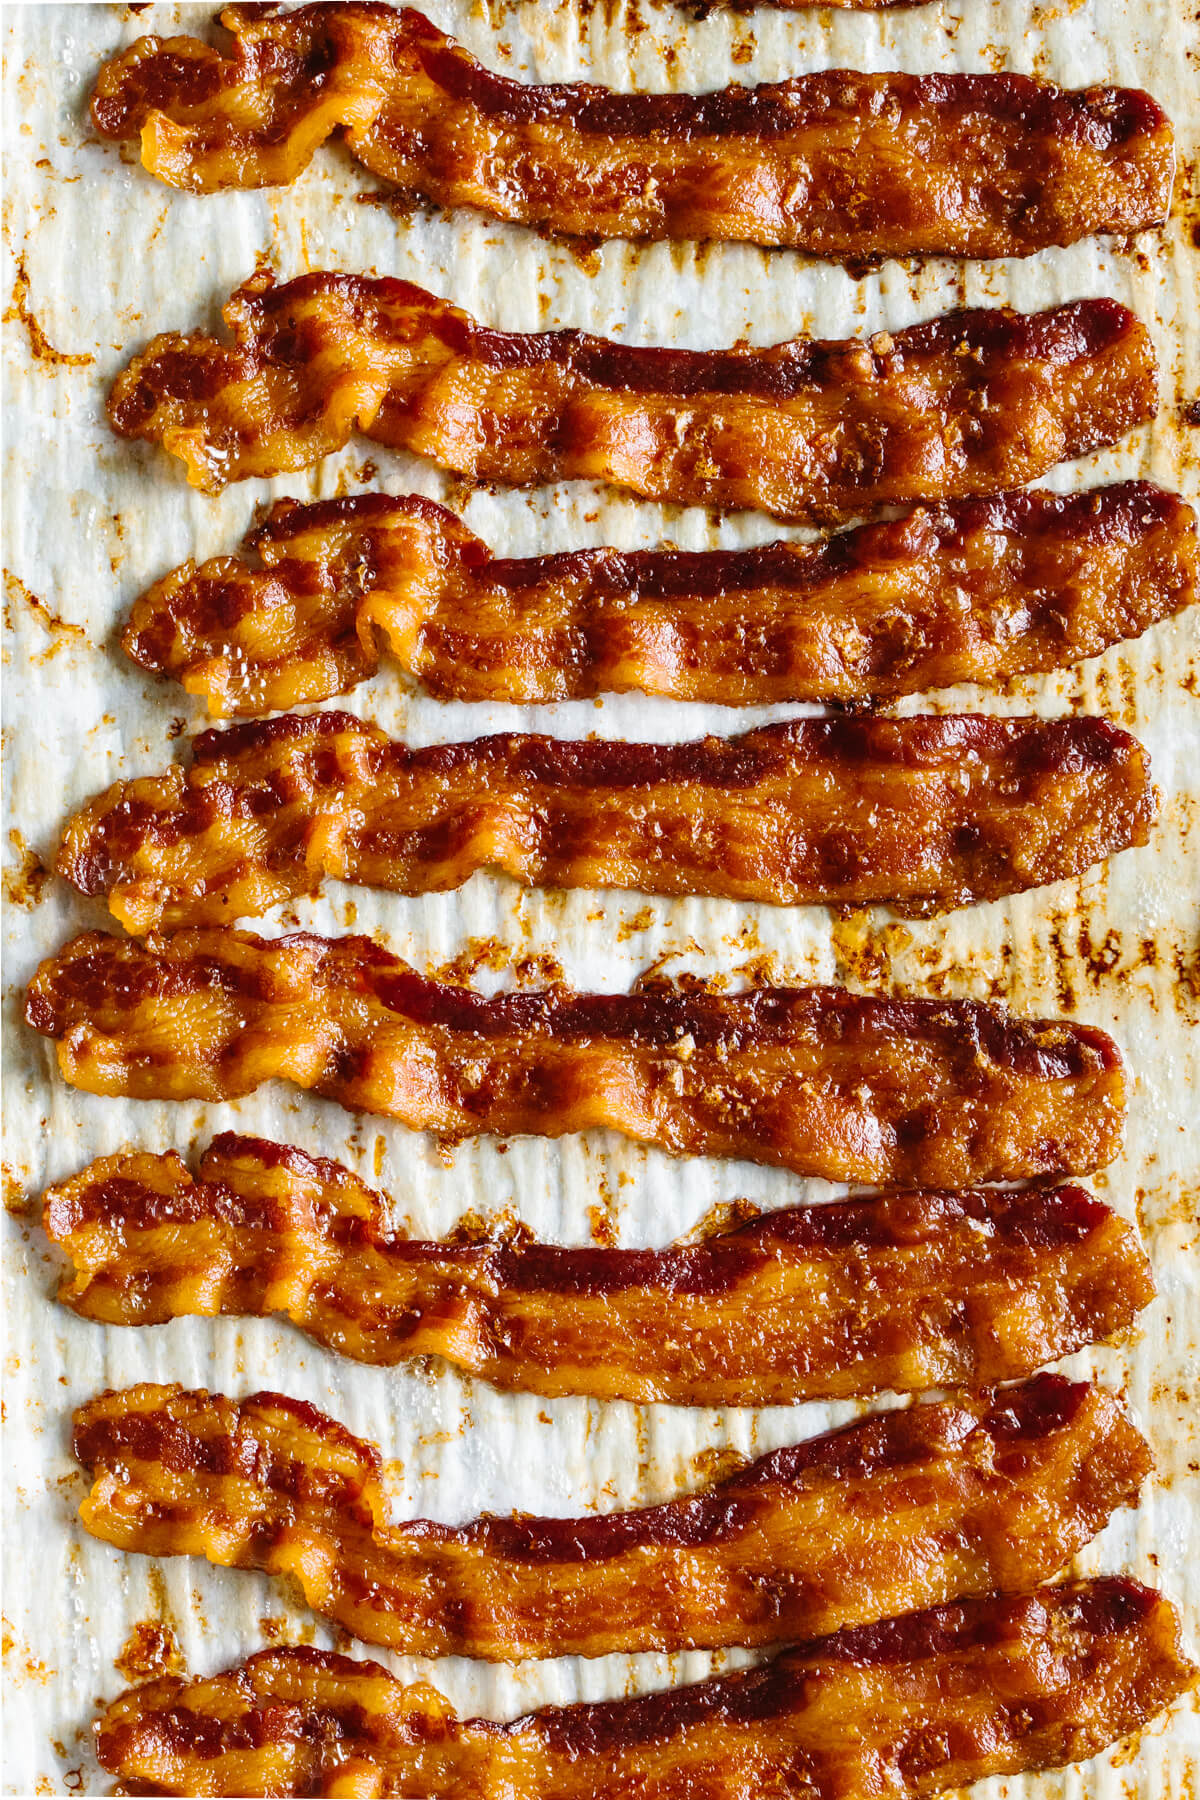 Slices of cooked bacon on a sheet tray.